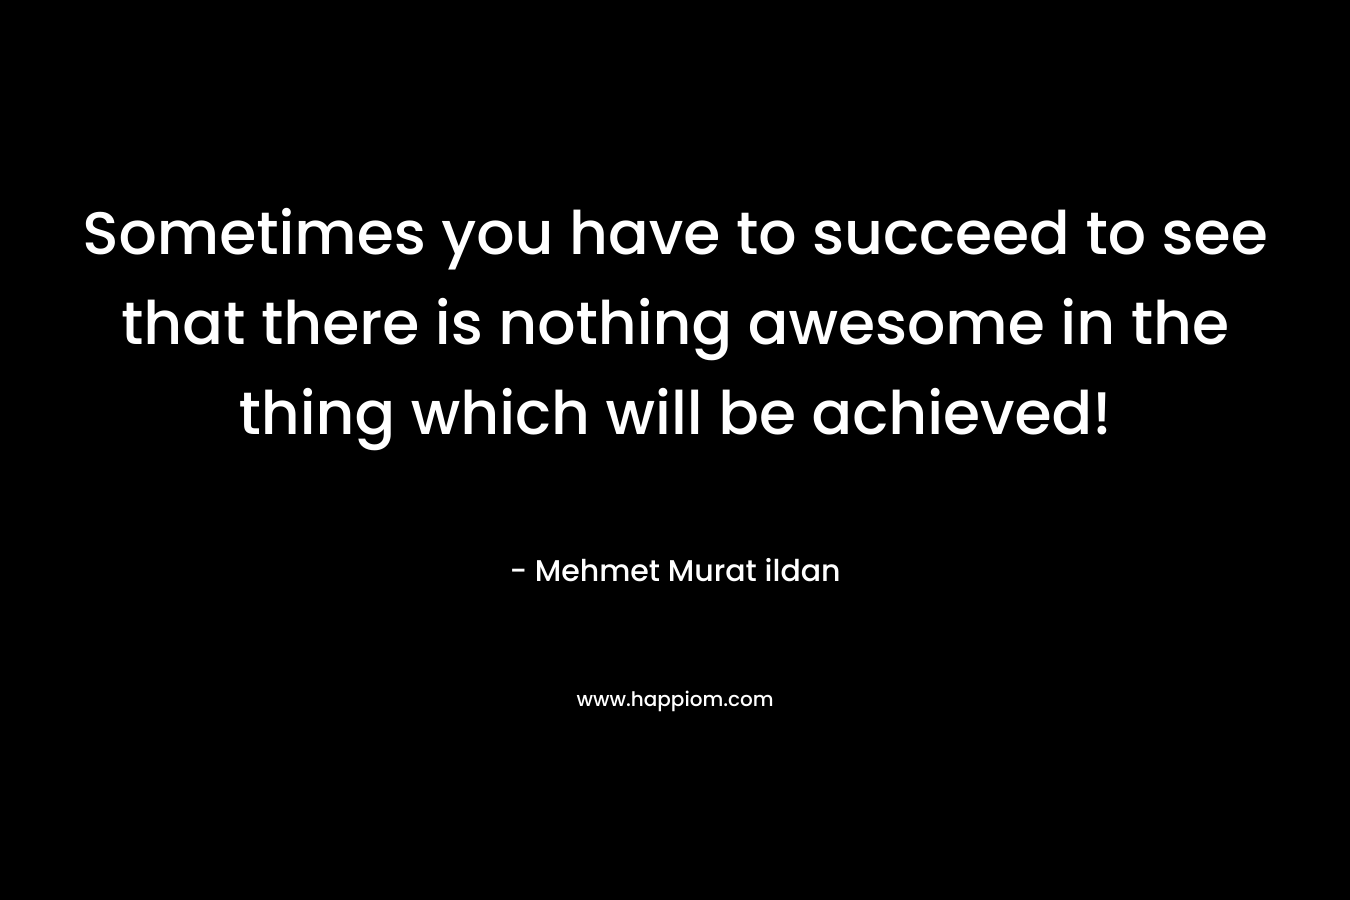 Sometimes you have to succeed to see that there is nothing awesome in the thing which will be achieved! – Mehmet Murat ildan